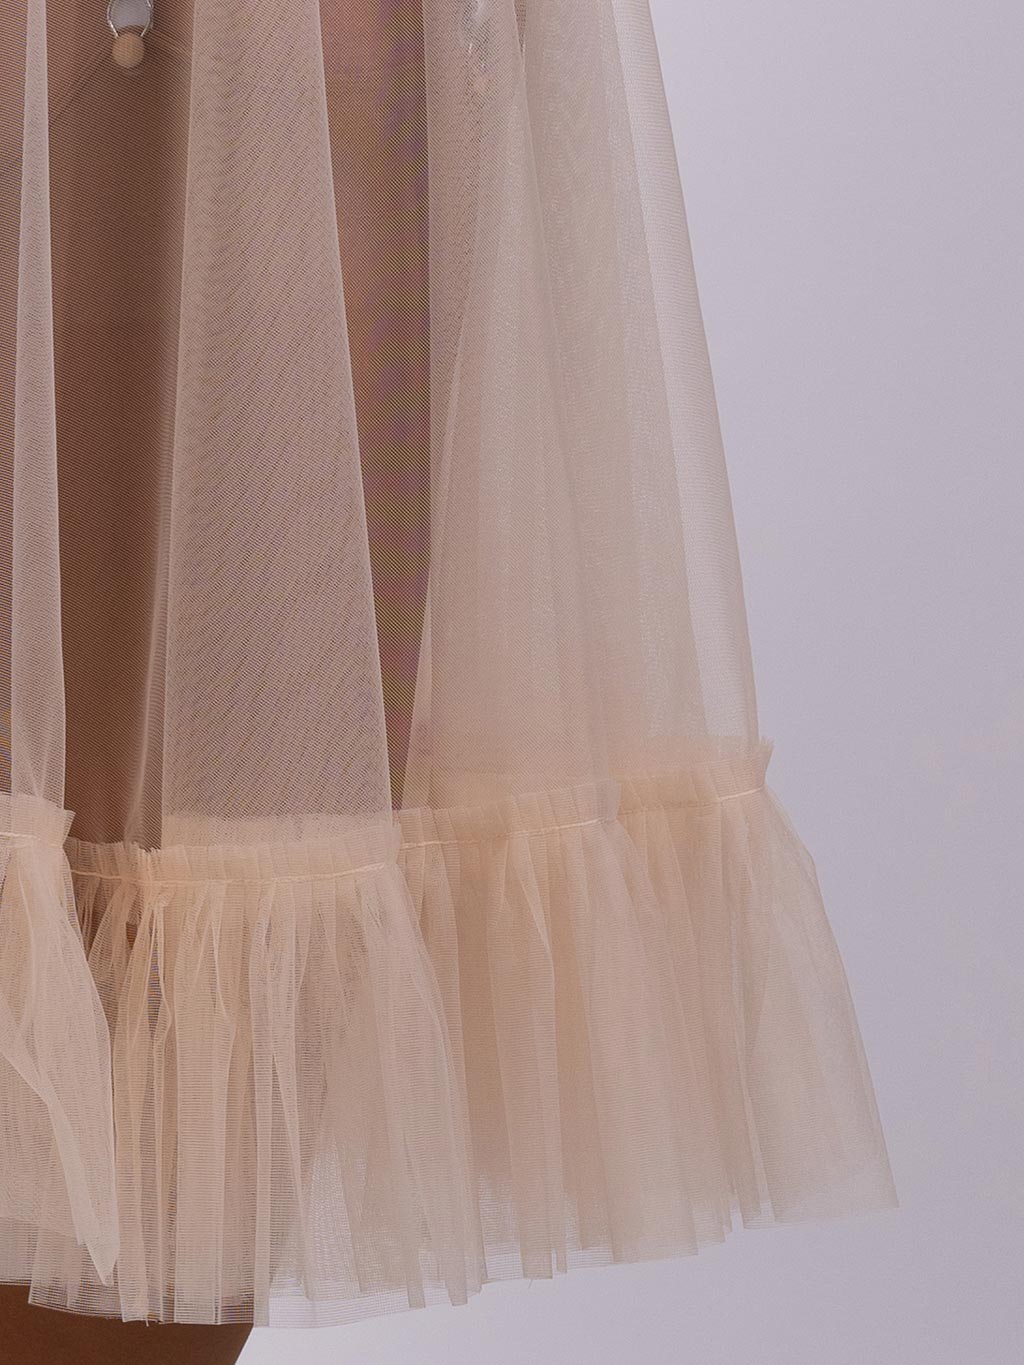 close up of a the pleated hem of a sheer vintage peach nylon petticoat